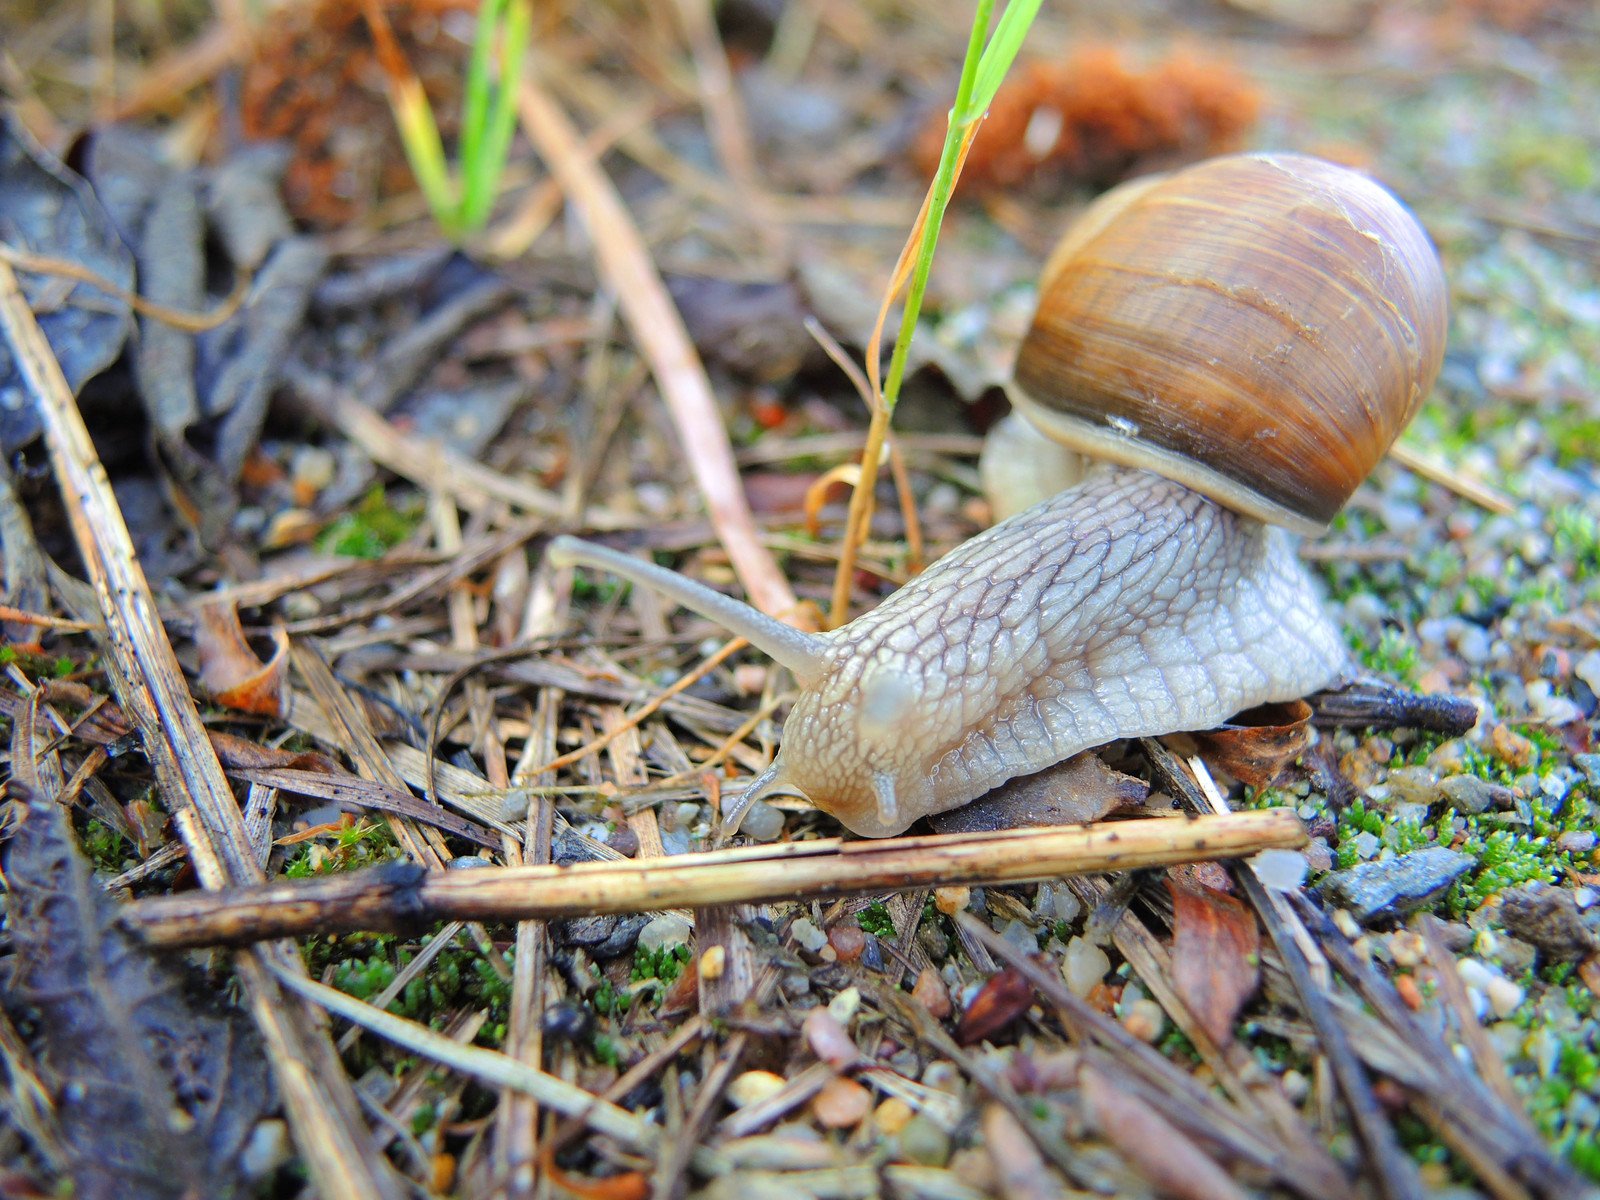 a snail is crawling along the ground in the wild